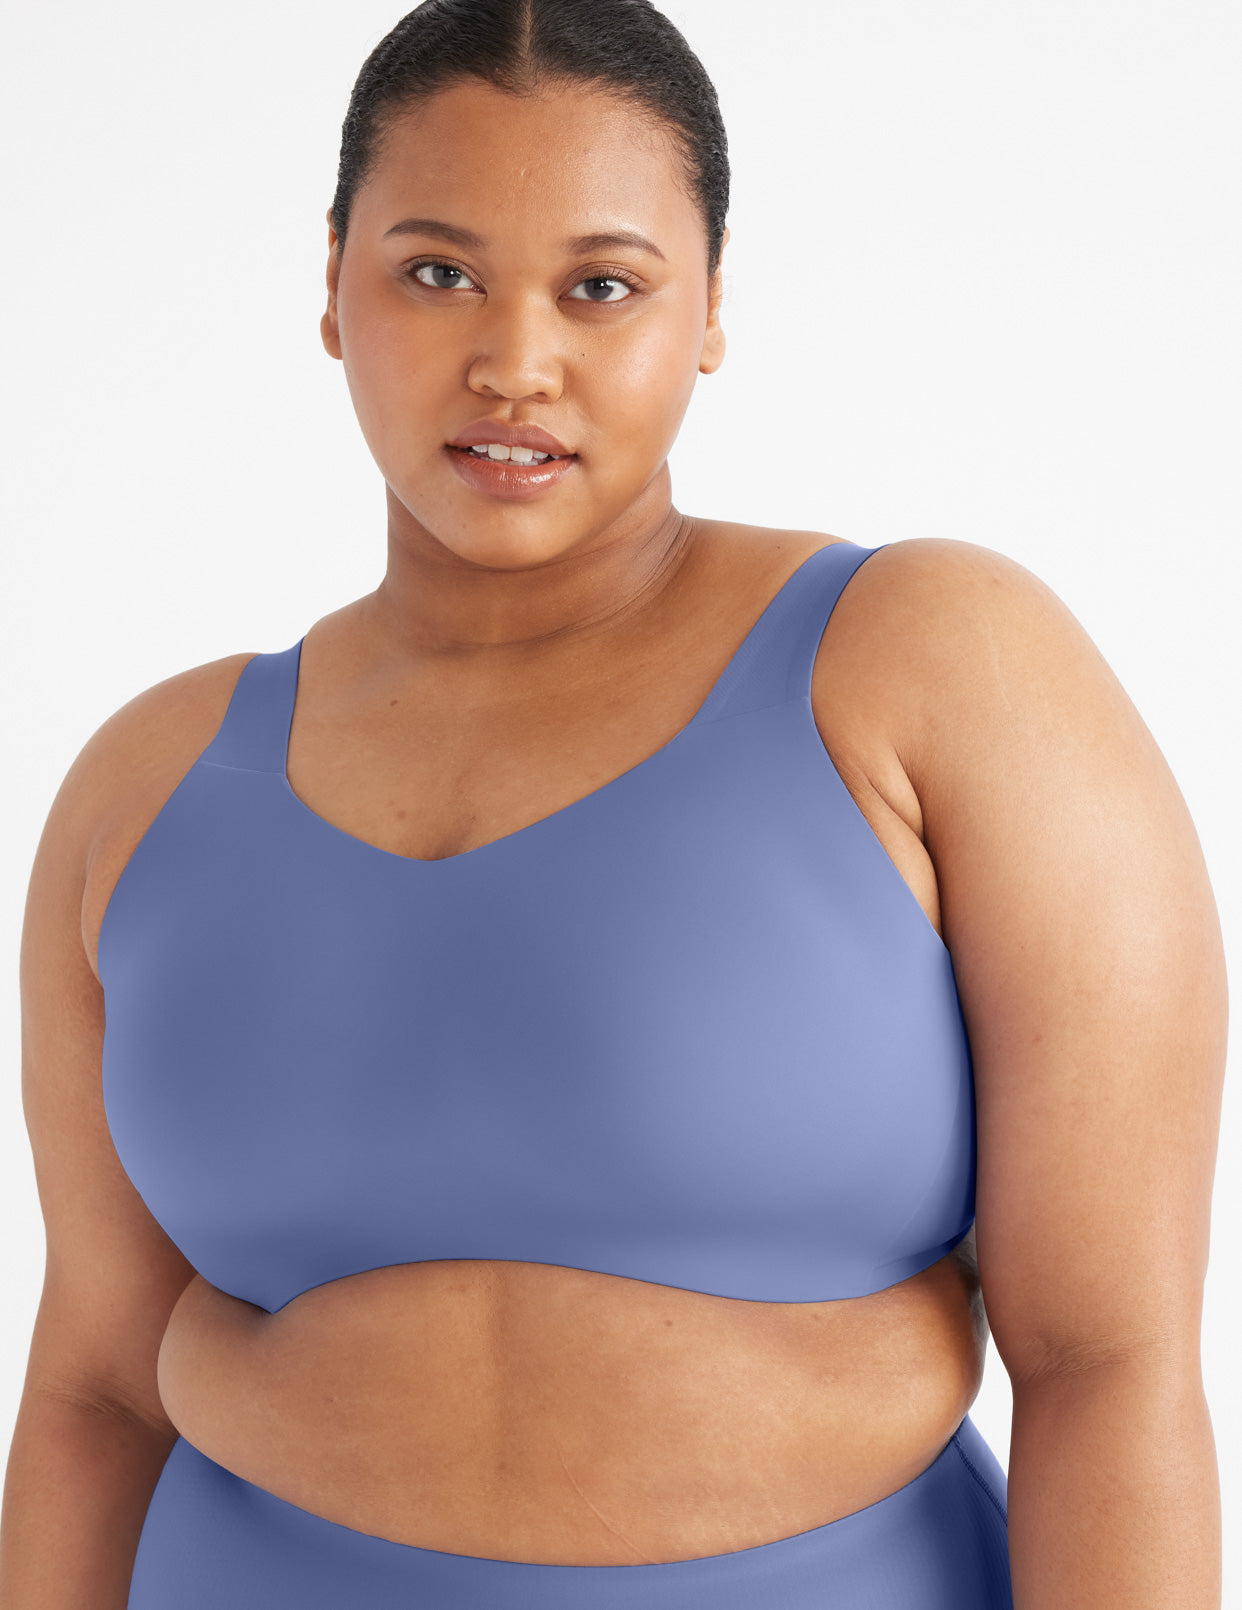 The Catalyst Best High Impact Sports Bra For Support And Comfort Knix 